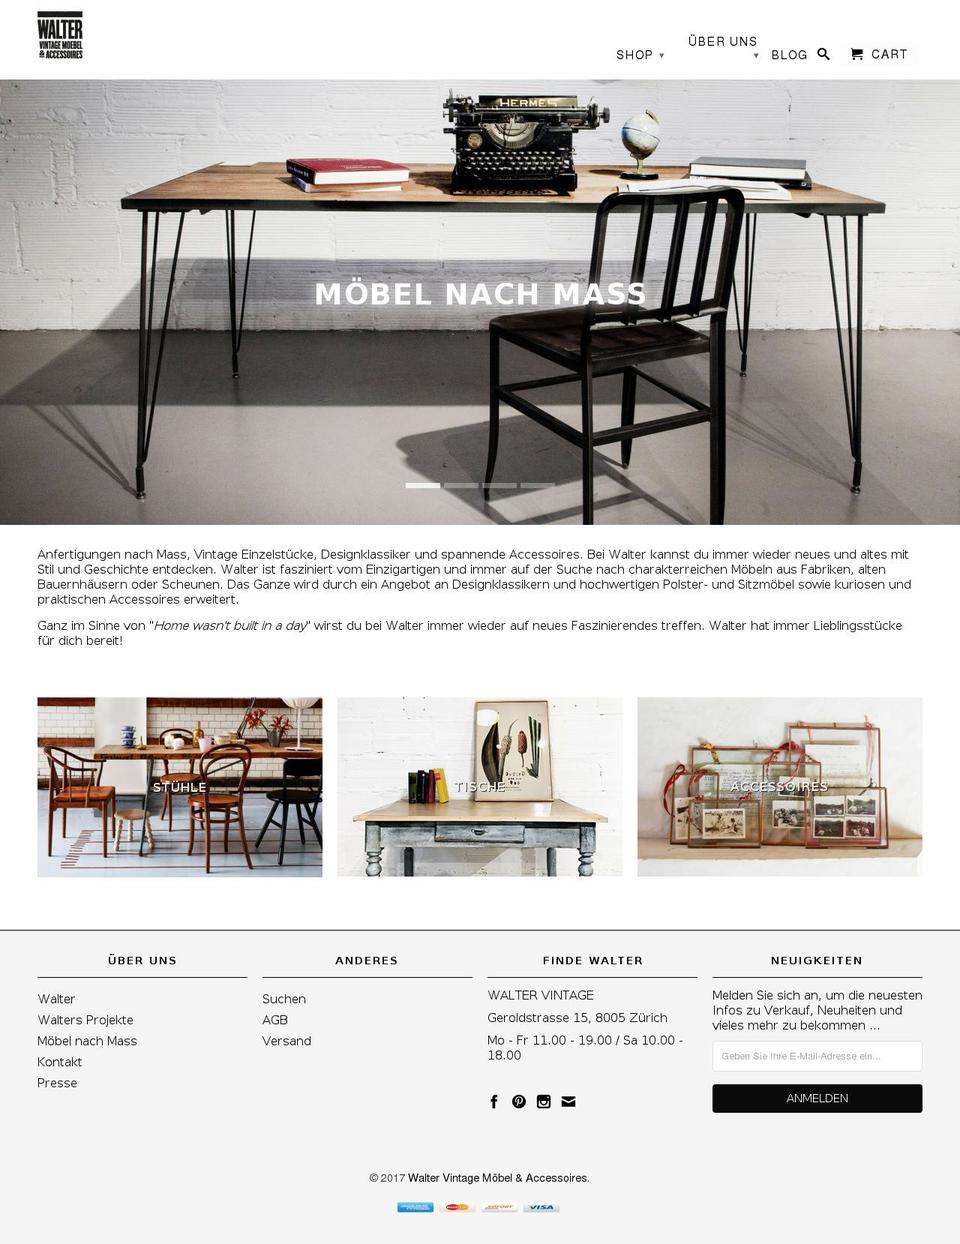 Impact Shopify theme site example walterwalter.ch